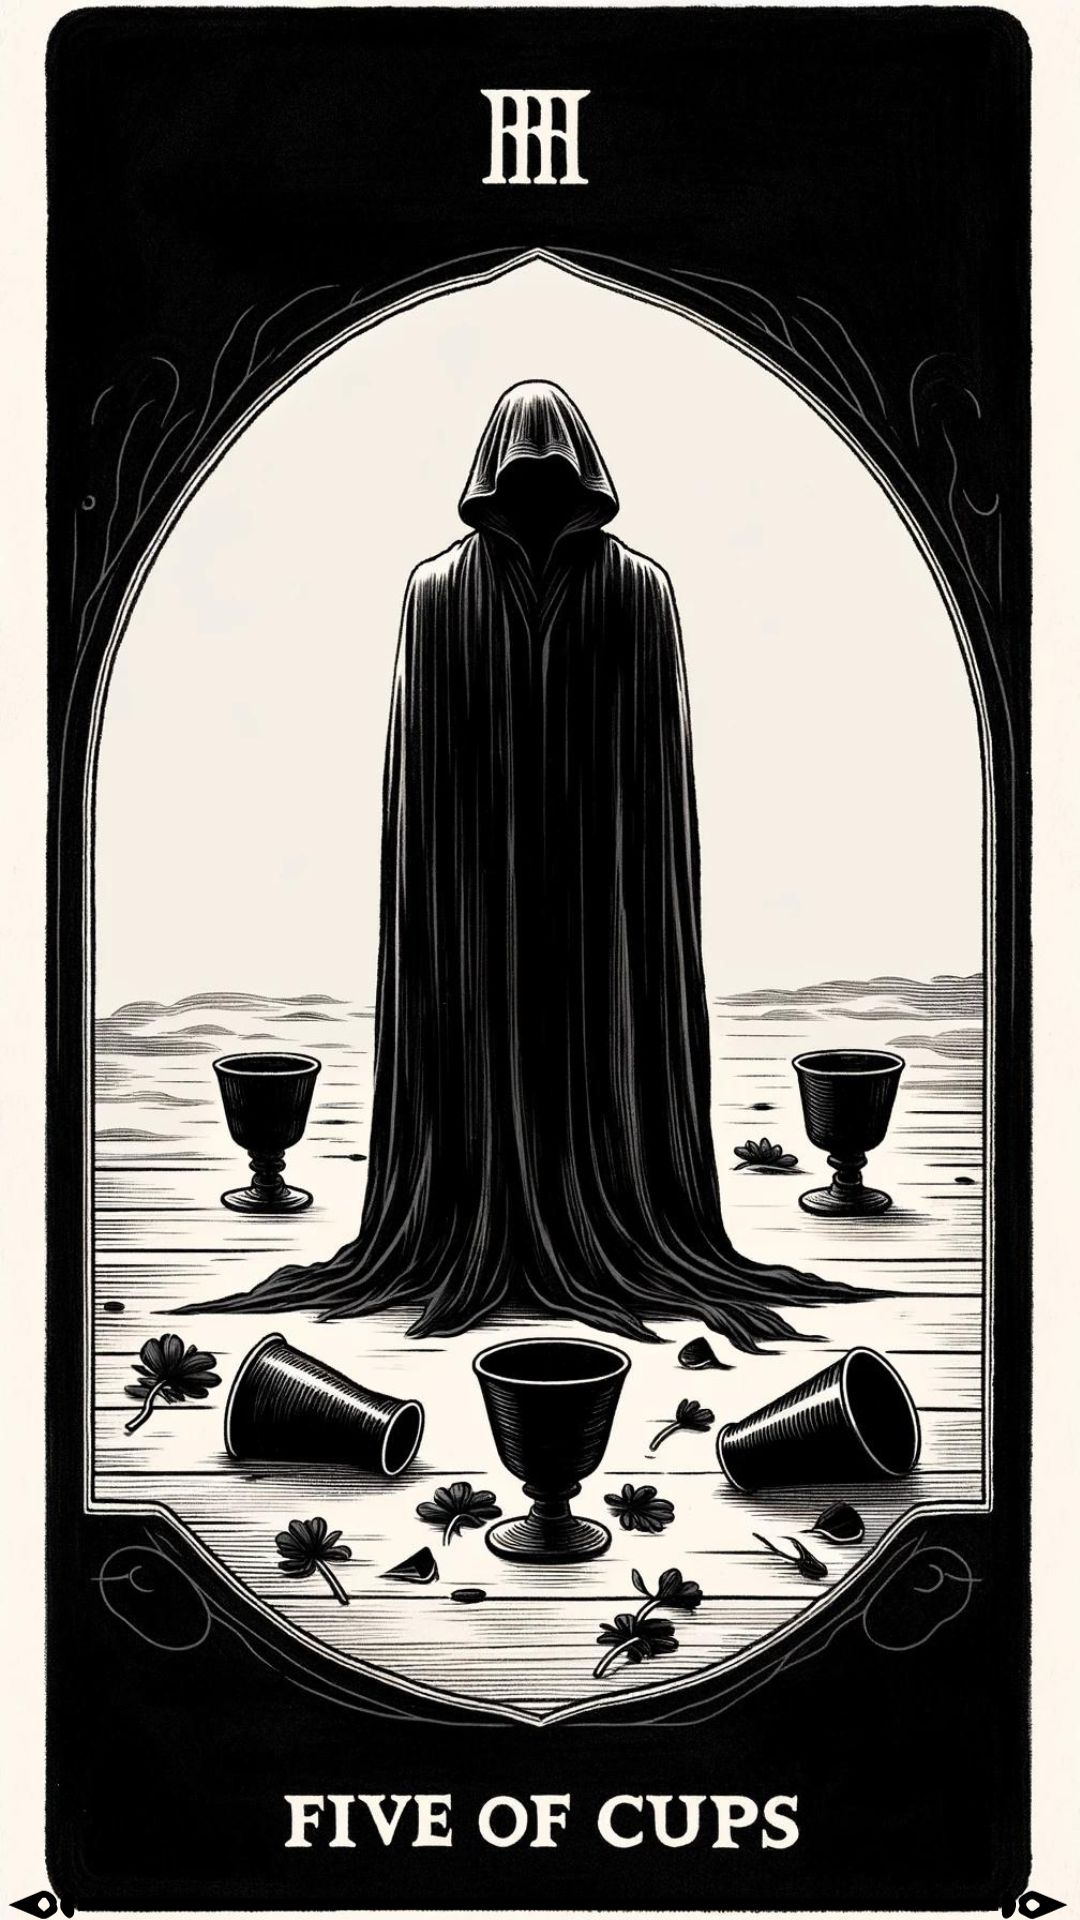 An illustration of the Five of Cups tarot card, showcasing a figure in a black cloak seen from behind, symbolizing self-pity and loss. In front of them, three cups are depicted as overturned, representing disappointments or missed opportunities. Behind the figure, subtly positioned on the ground, are two upright cups, signifying unseen potential and hope amidst despair. The minimalistic setting highlights the theme of sorrow, yet suggests the presence of unacknowledged possibilities.